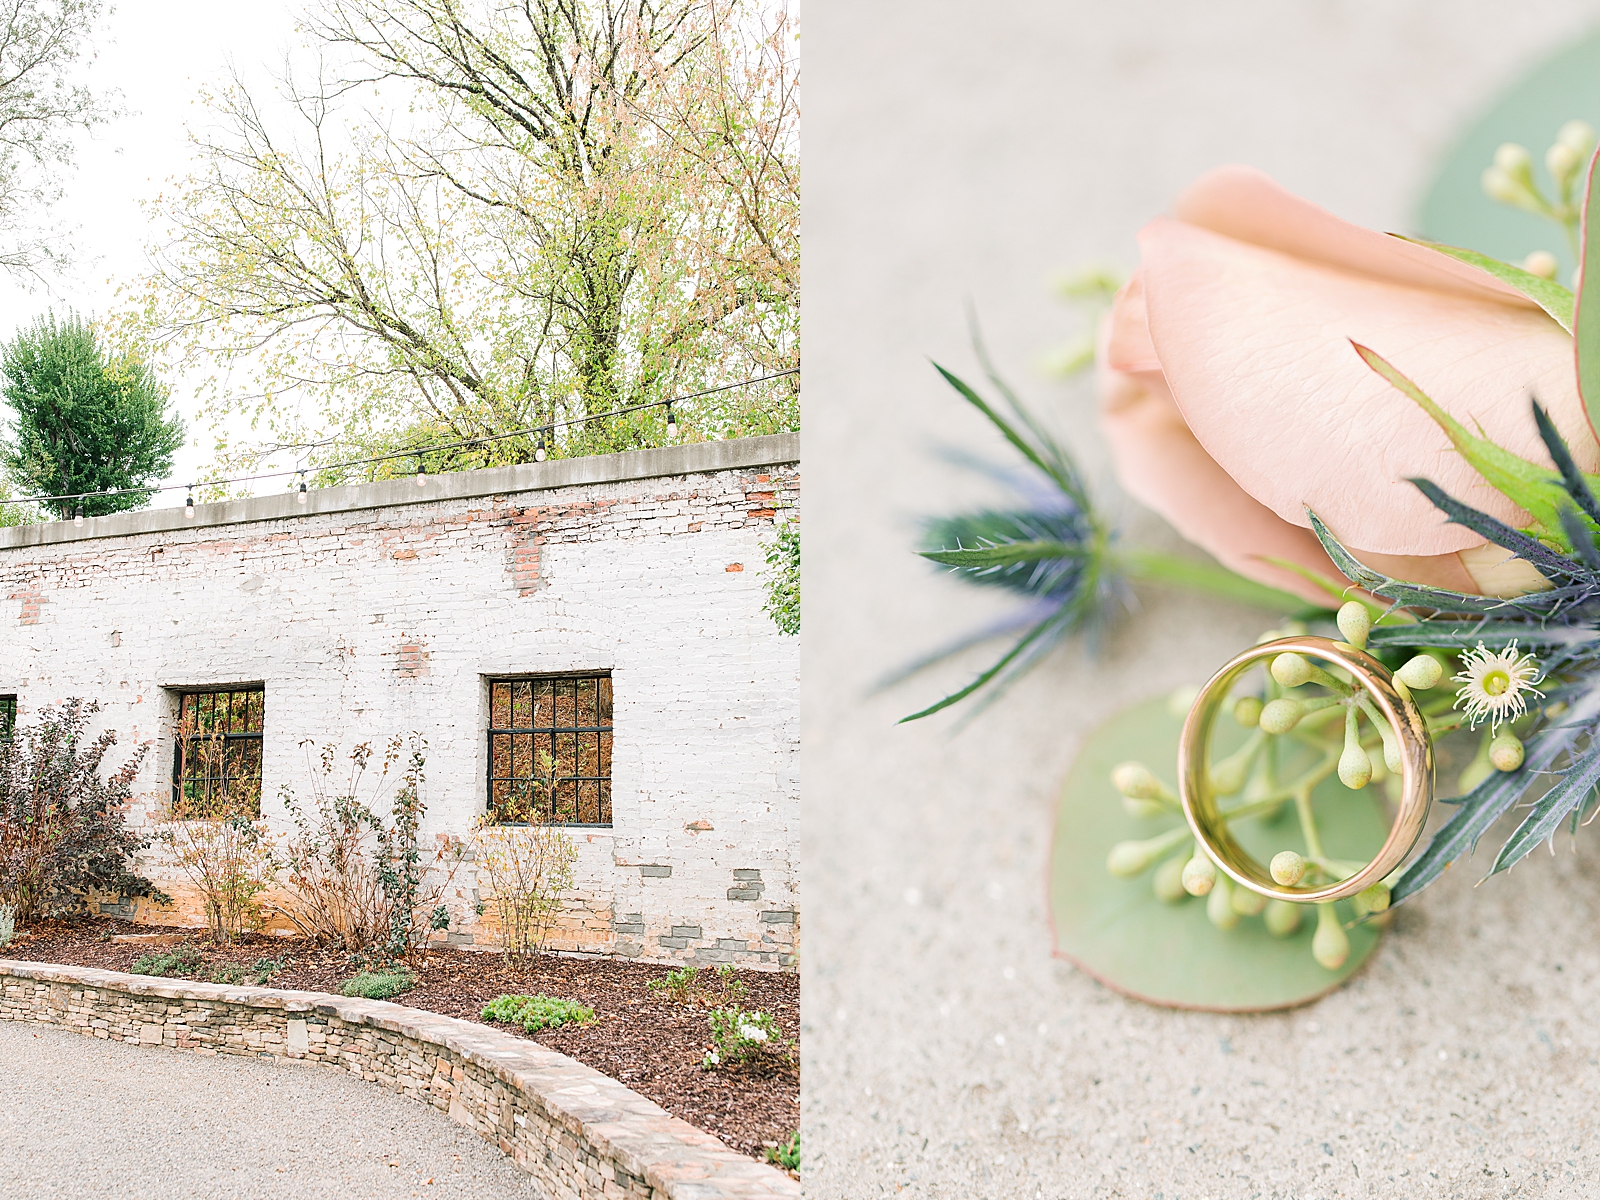 The Hackney Warehouse Courtyard and Detail of Flower with Ring Photos